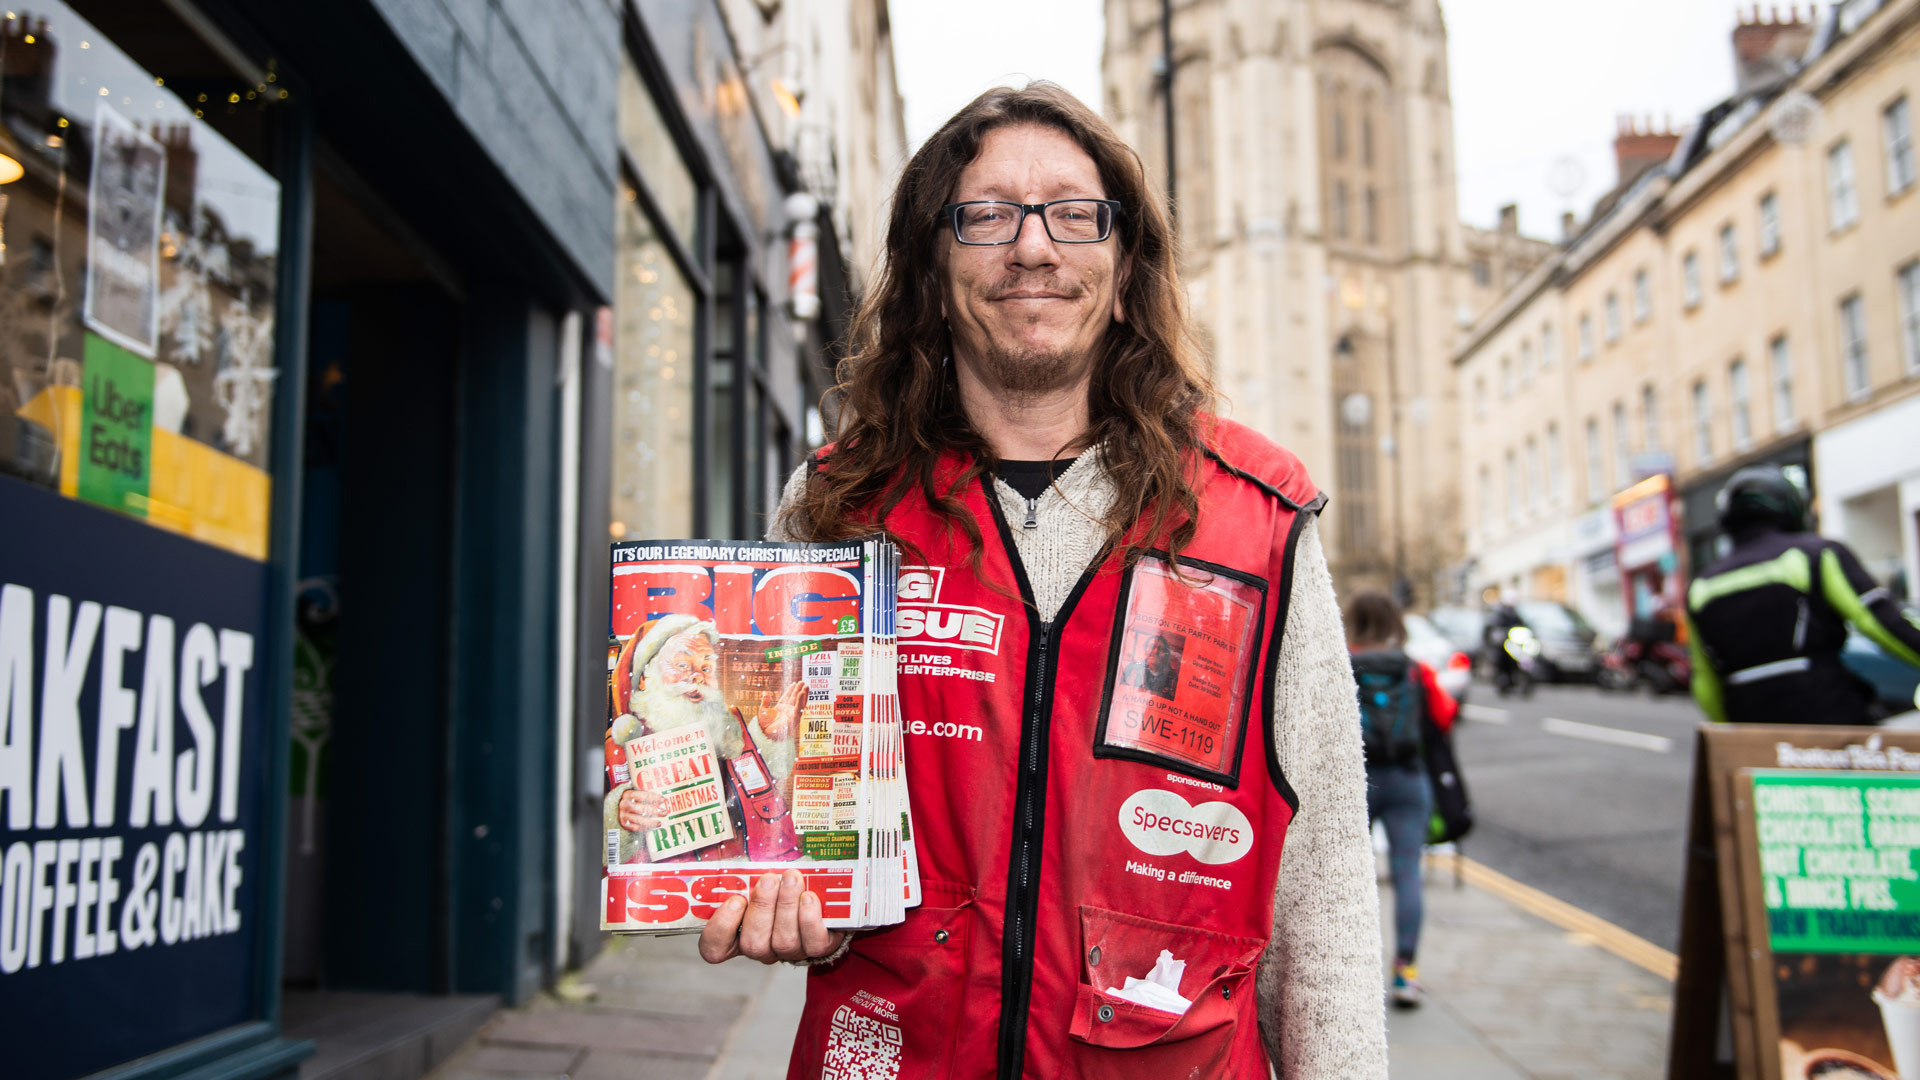 Outdoor image of Jack, a Big Issue vendor, standing on a city street holding a copy of the Big Issue magazine. He's wearing a red vest with the Specsavers logo, signifying their partnership, and glasses. The backdrop features an urban street scene with buildings, pedestrians, and a passing motorcyclist.